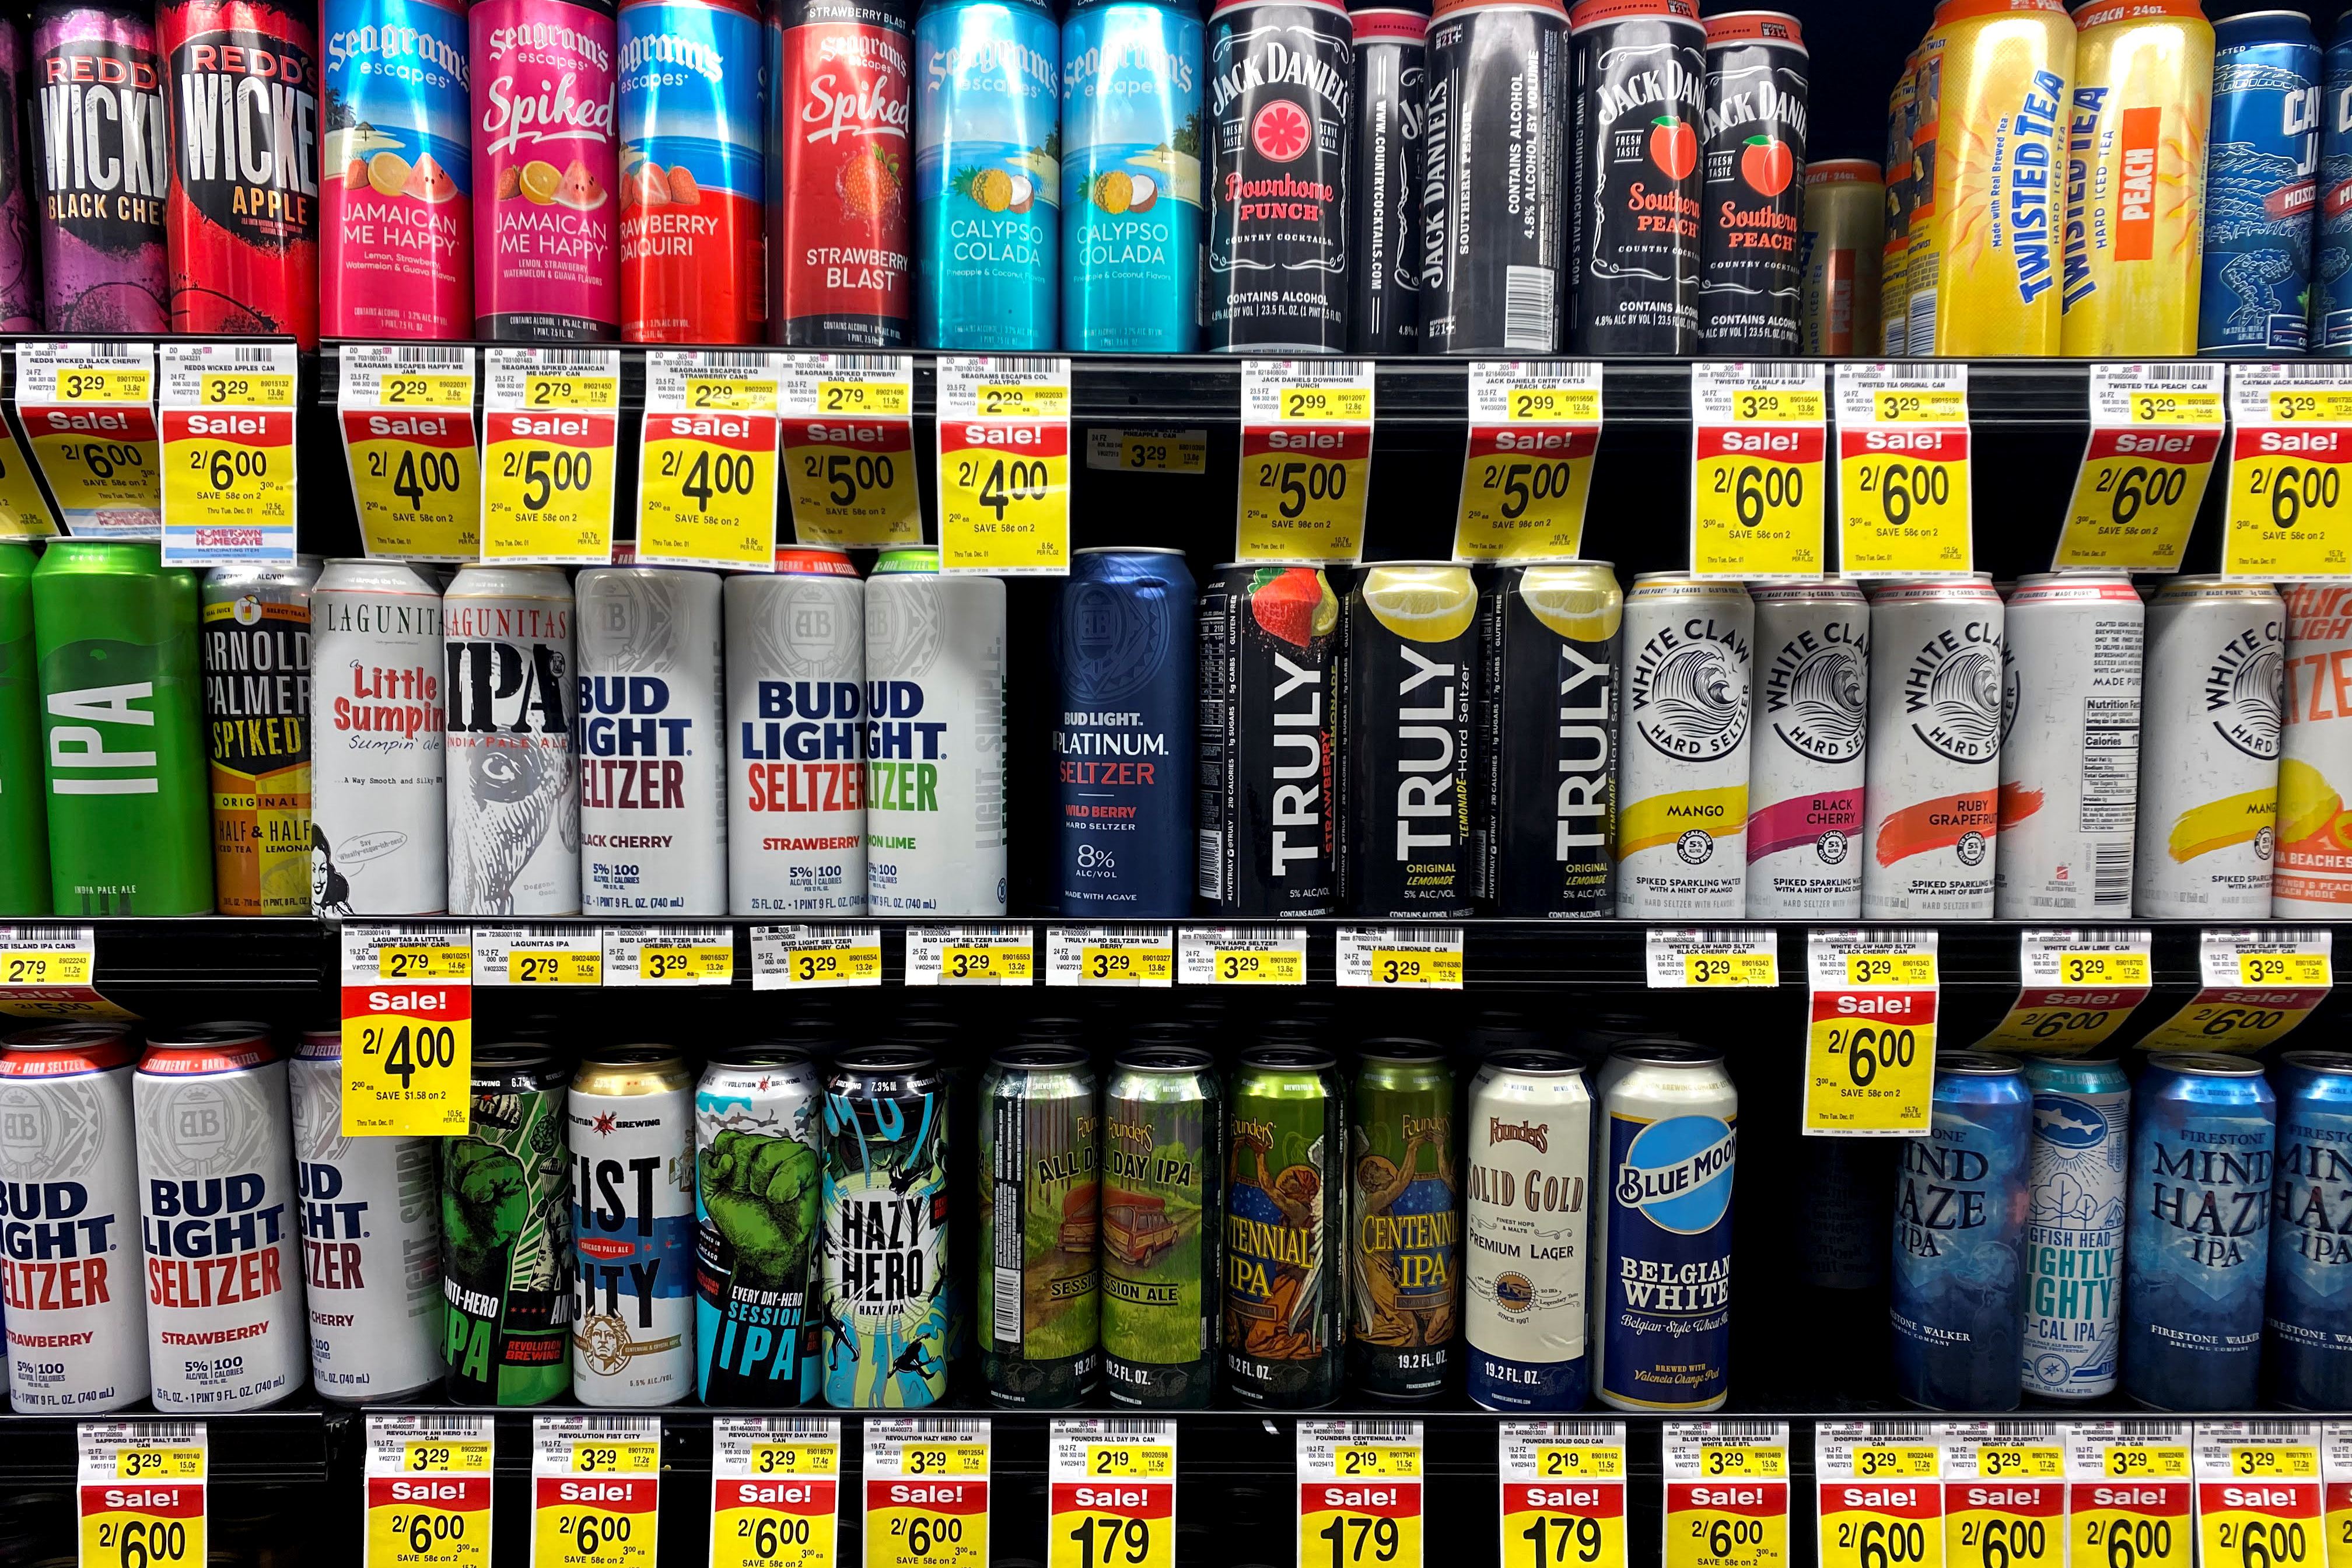 Cans of AB InBev's Bud Light hard seltzer are seen next to White Claw at Jewel-Osco supermarket in Chicago, October 21, 2020.